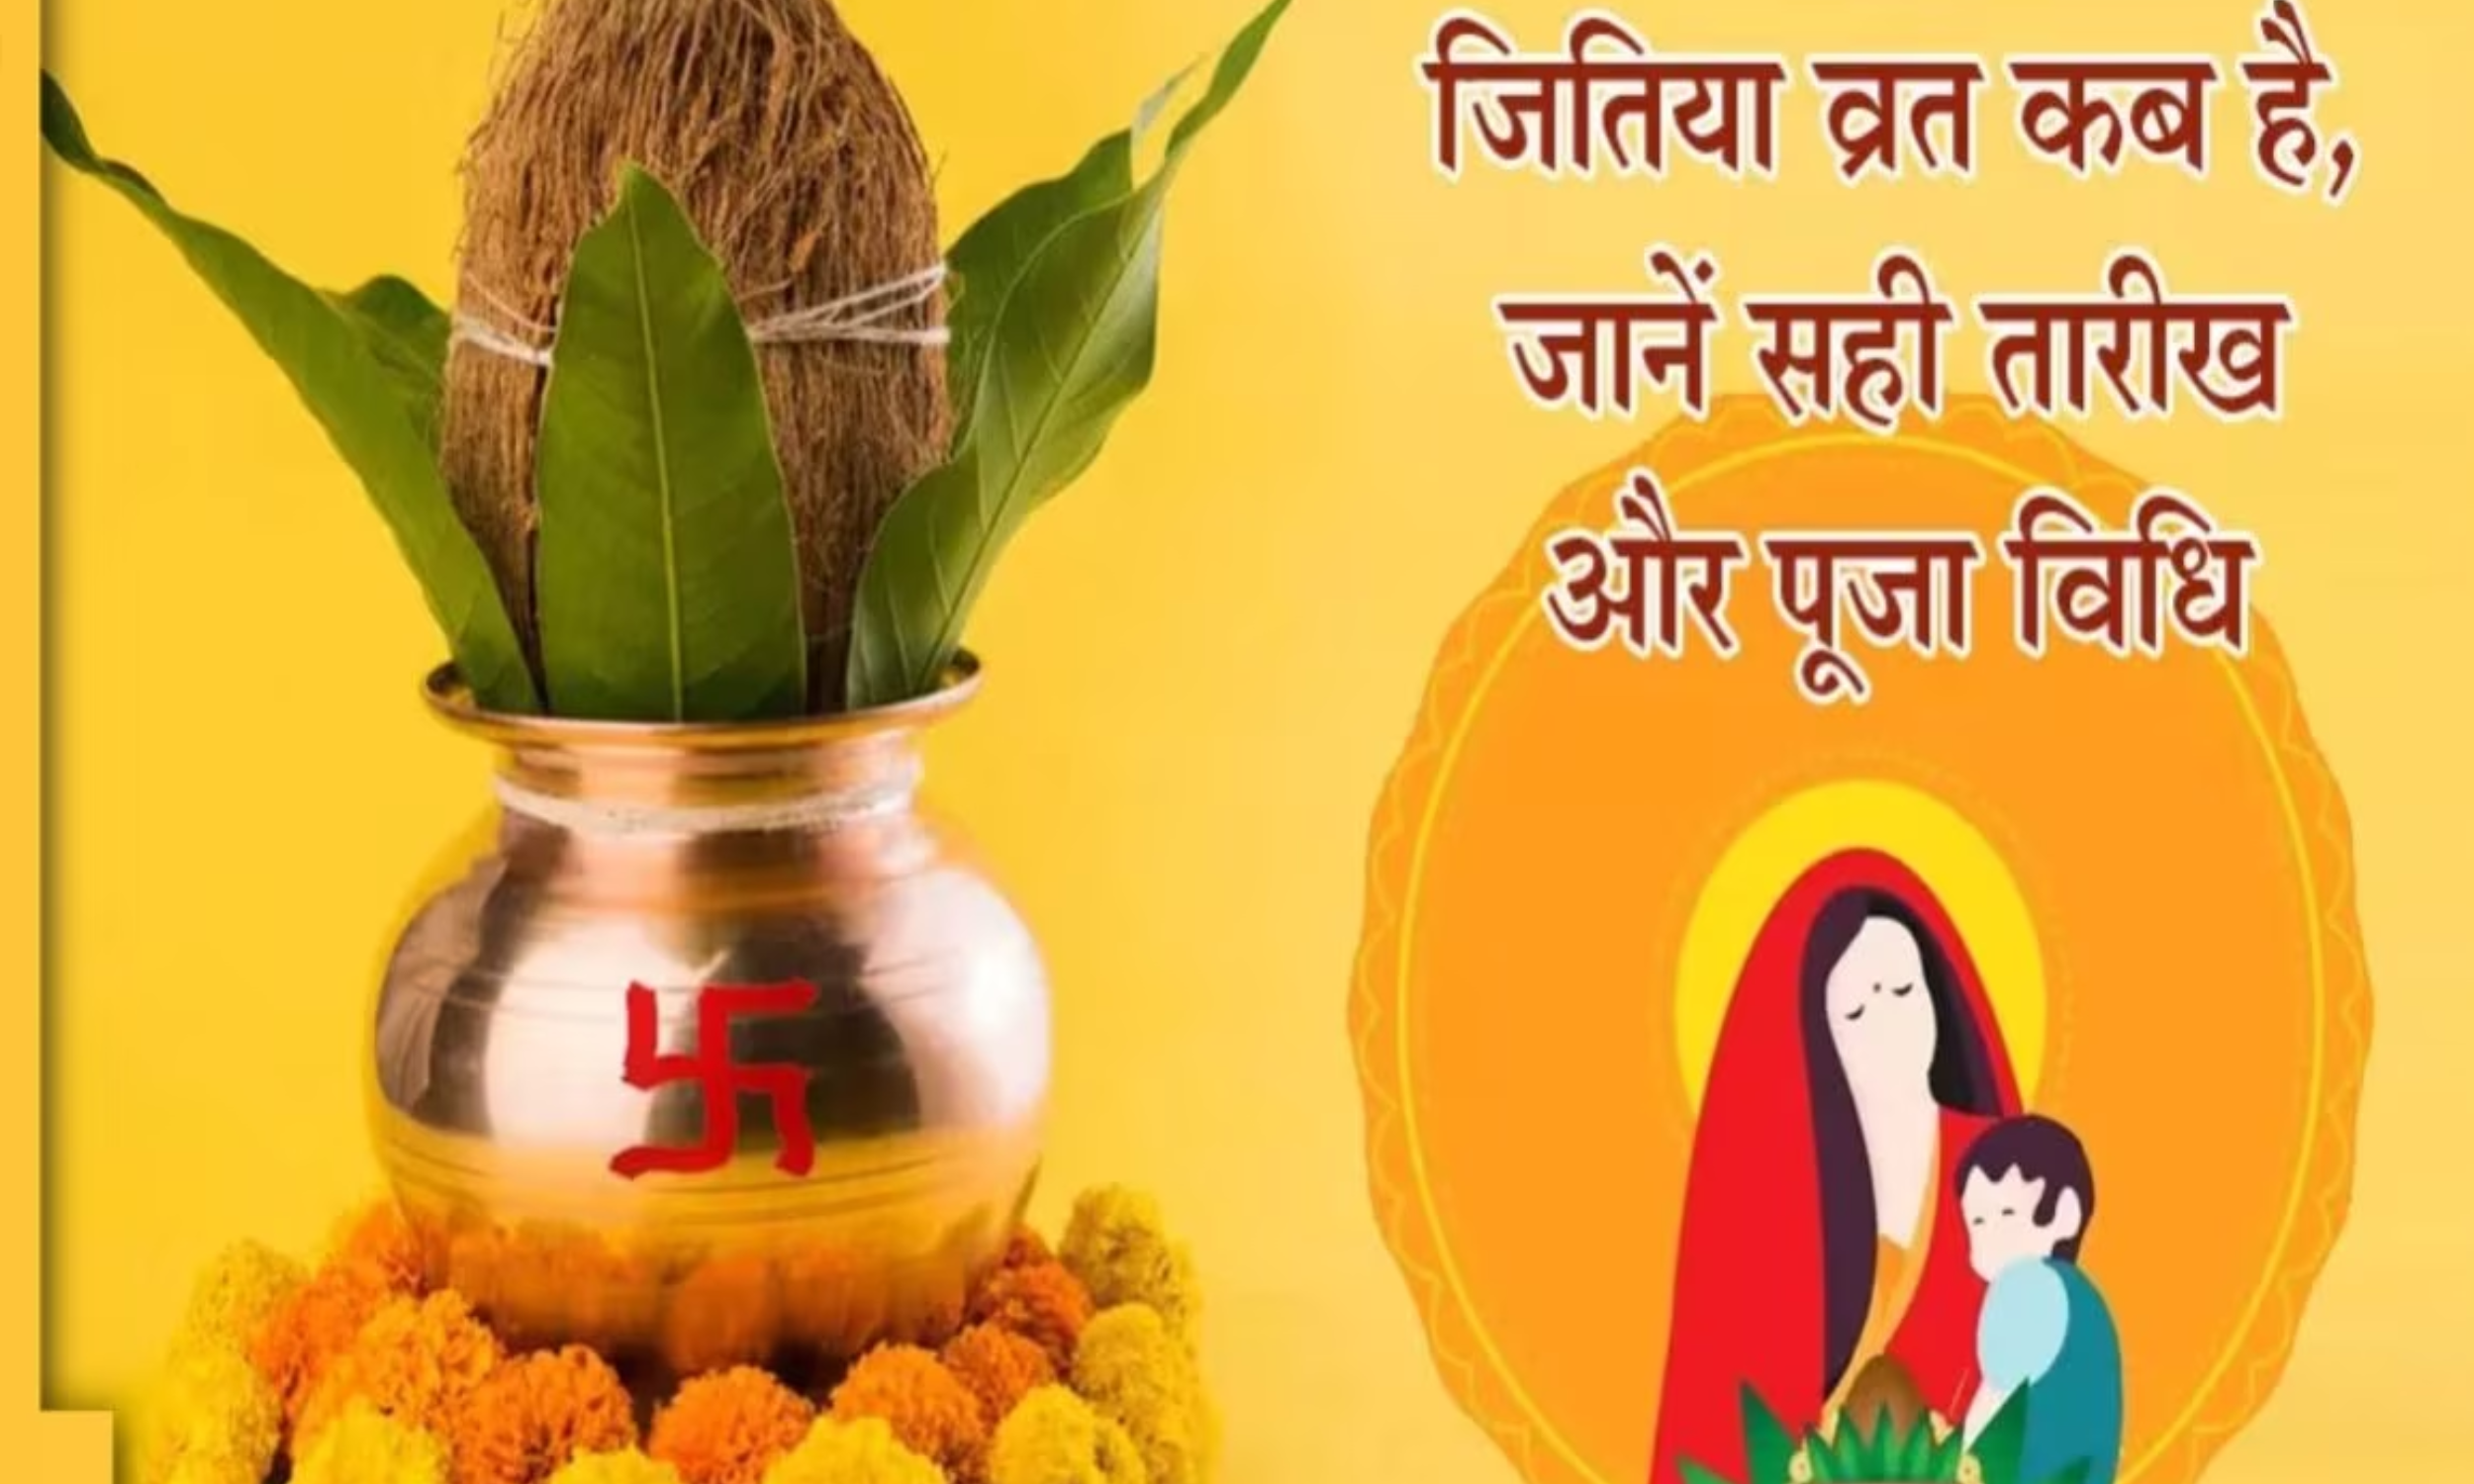 Jitiya is the observance of Vrat by mothers